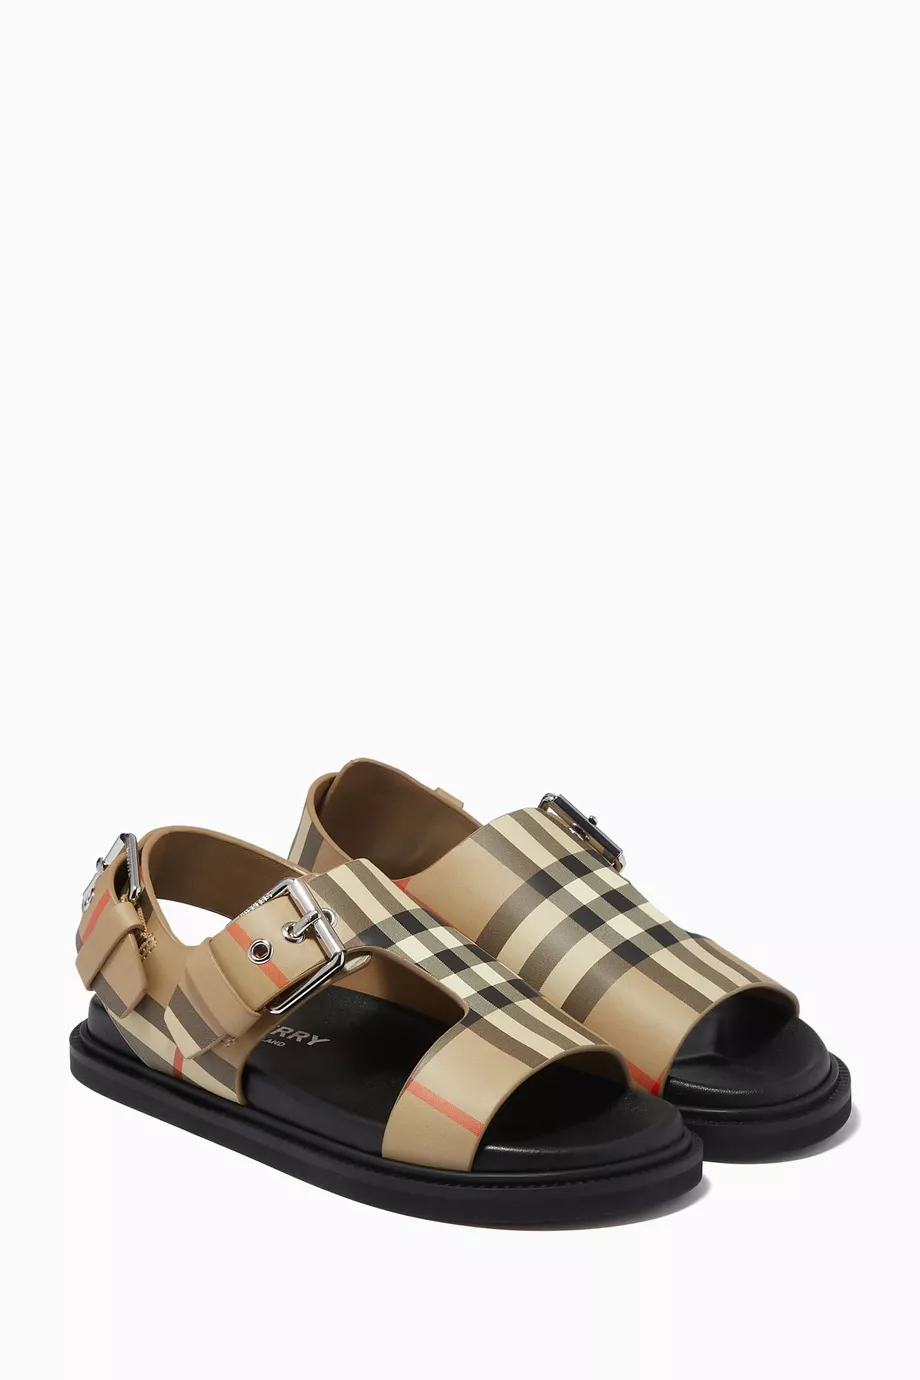 Shop Burberry Neutral Vintage Check Sandals in Leather for KIDS | Ounass  Saudi Arabia